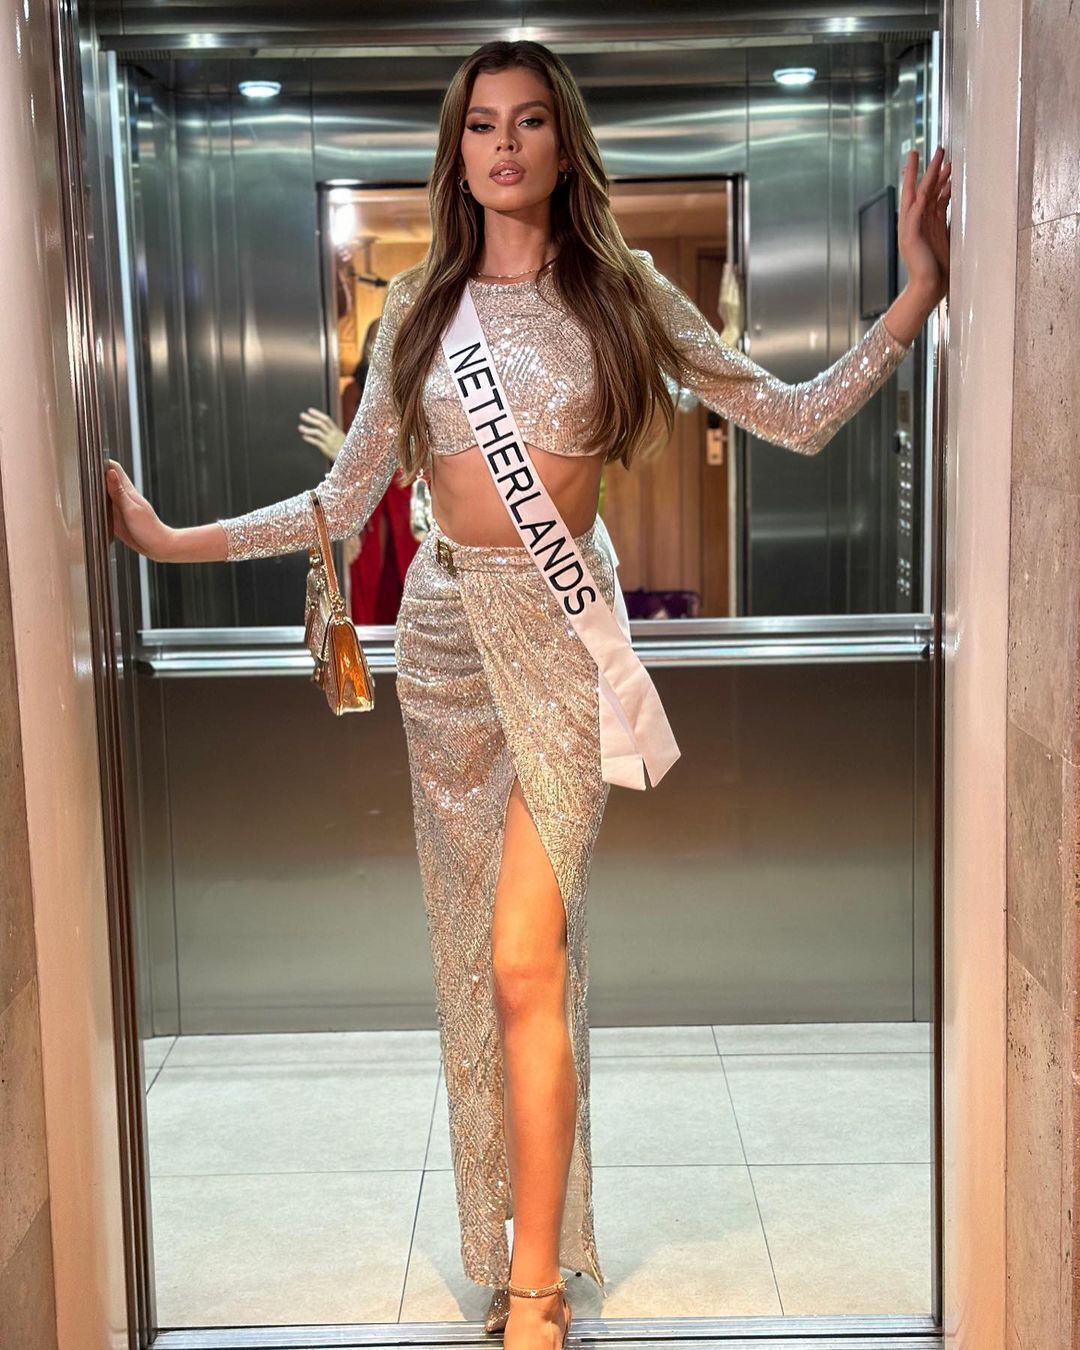 Transgender people take part in the Miss Universe pageant: what Marina Machete from Portugal and Rikki Kolle from the Netherlands look like